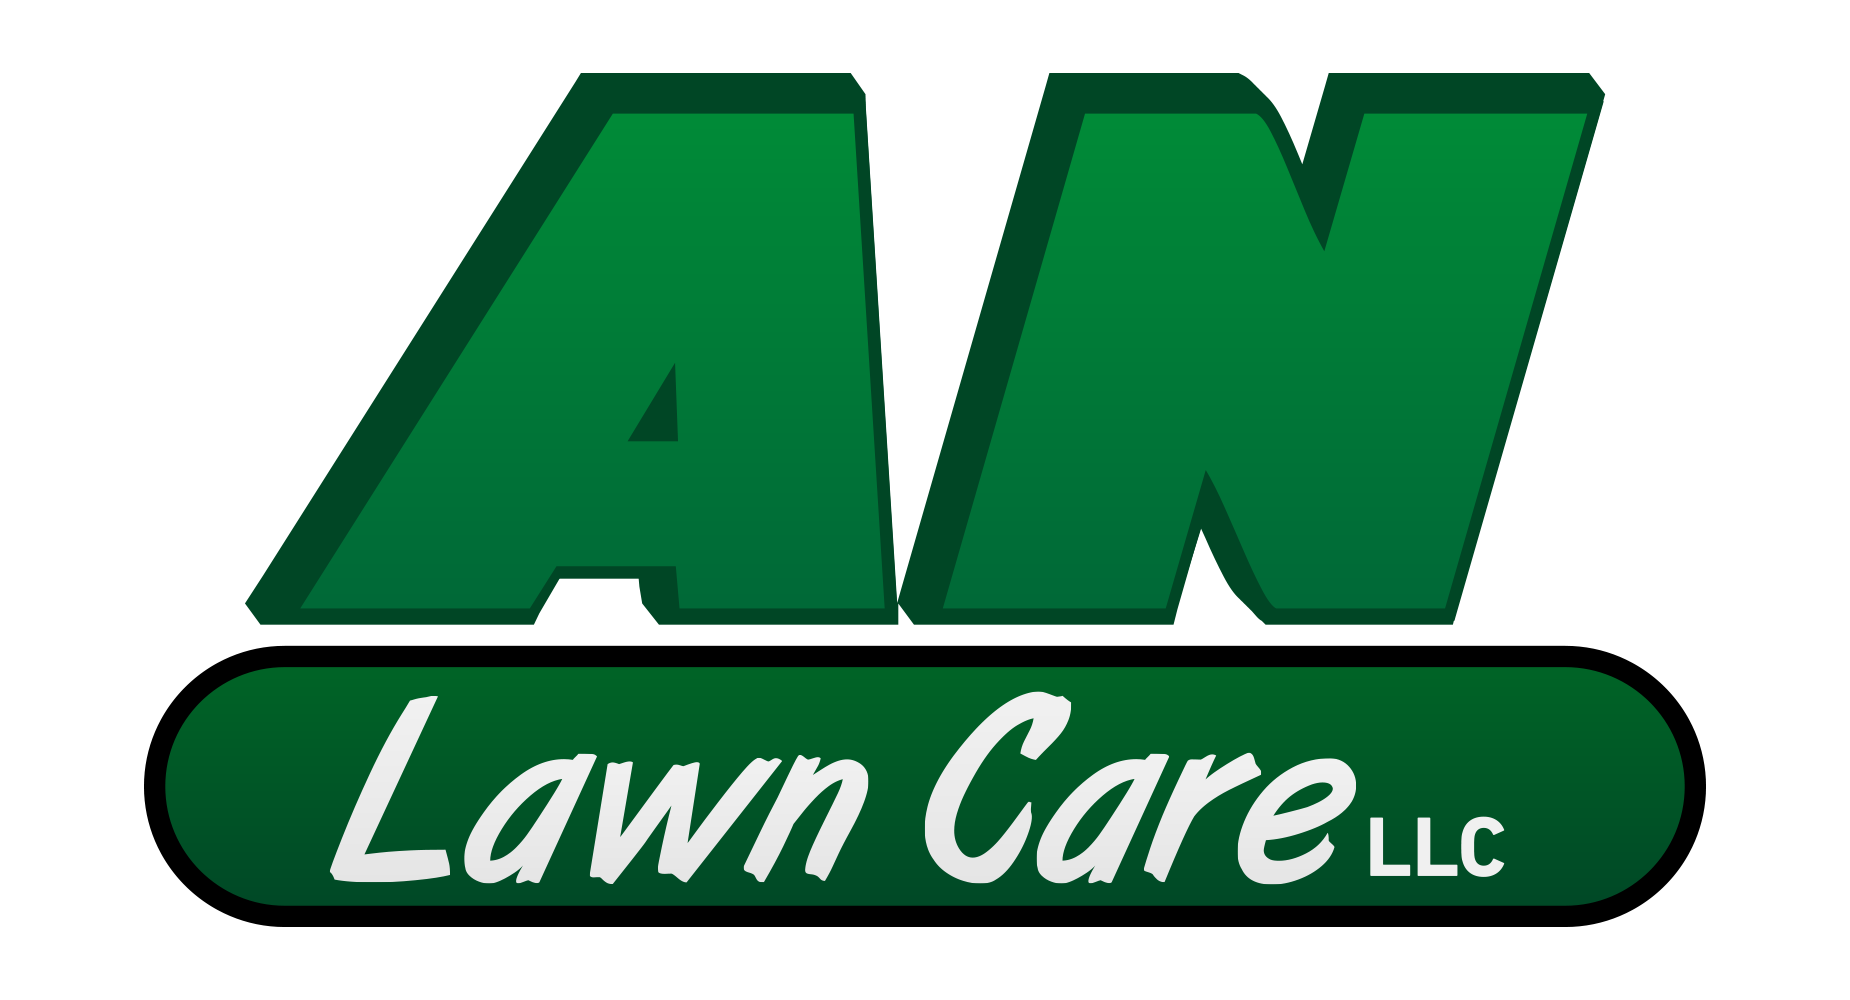 coupon clipart lawn care